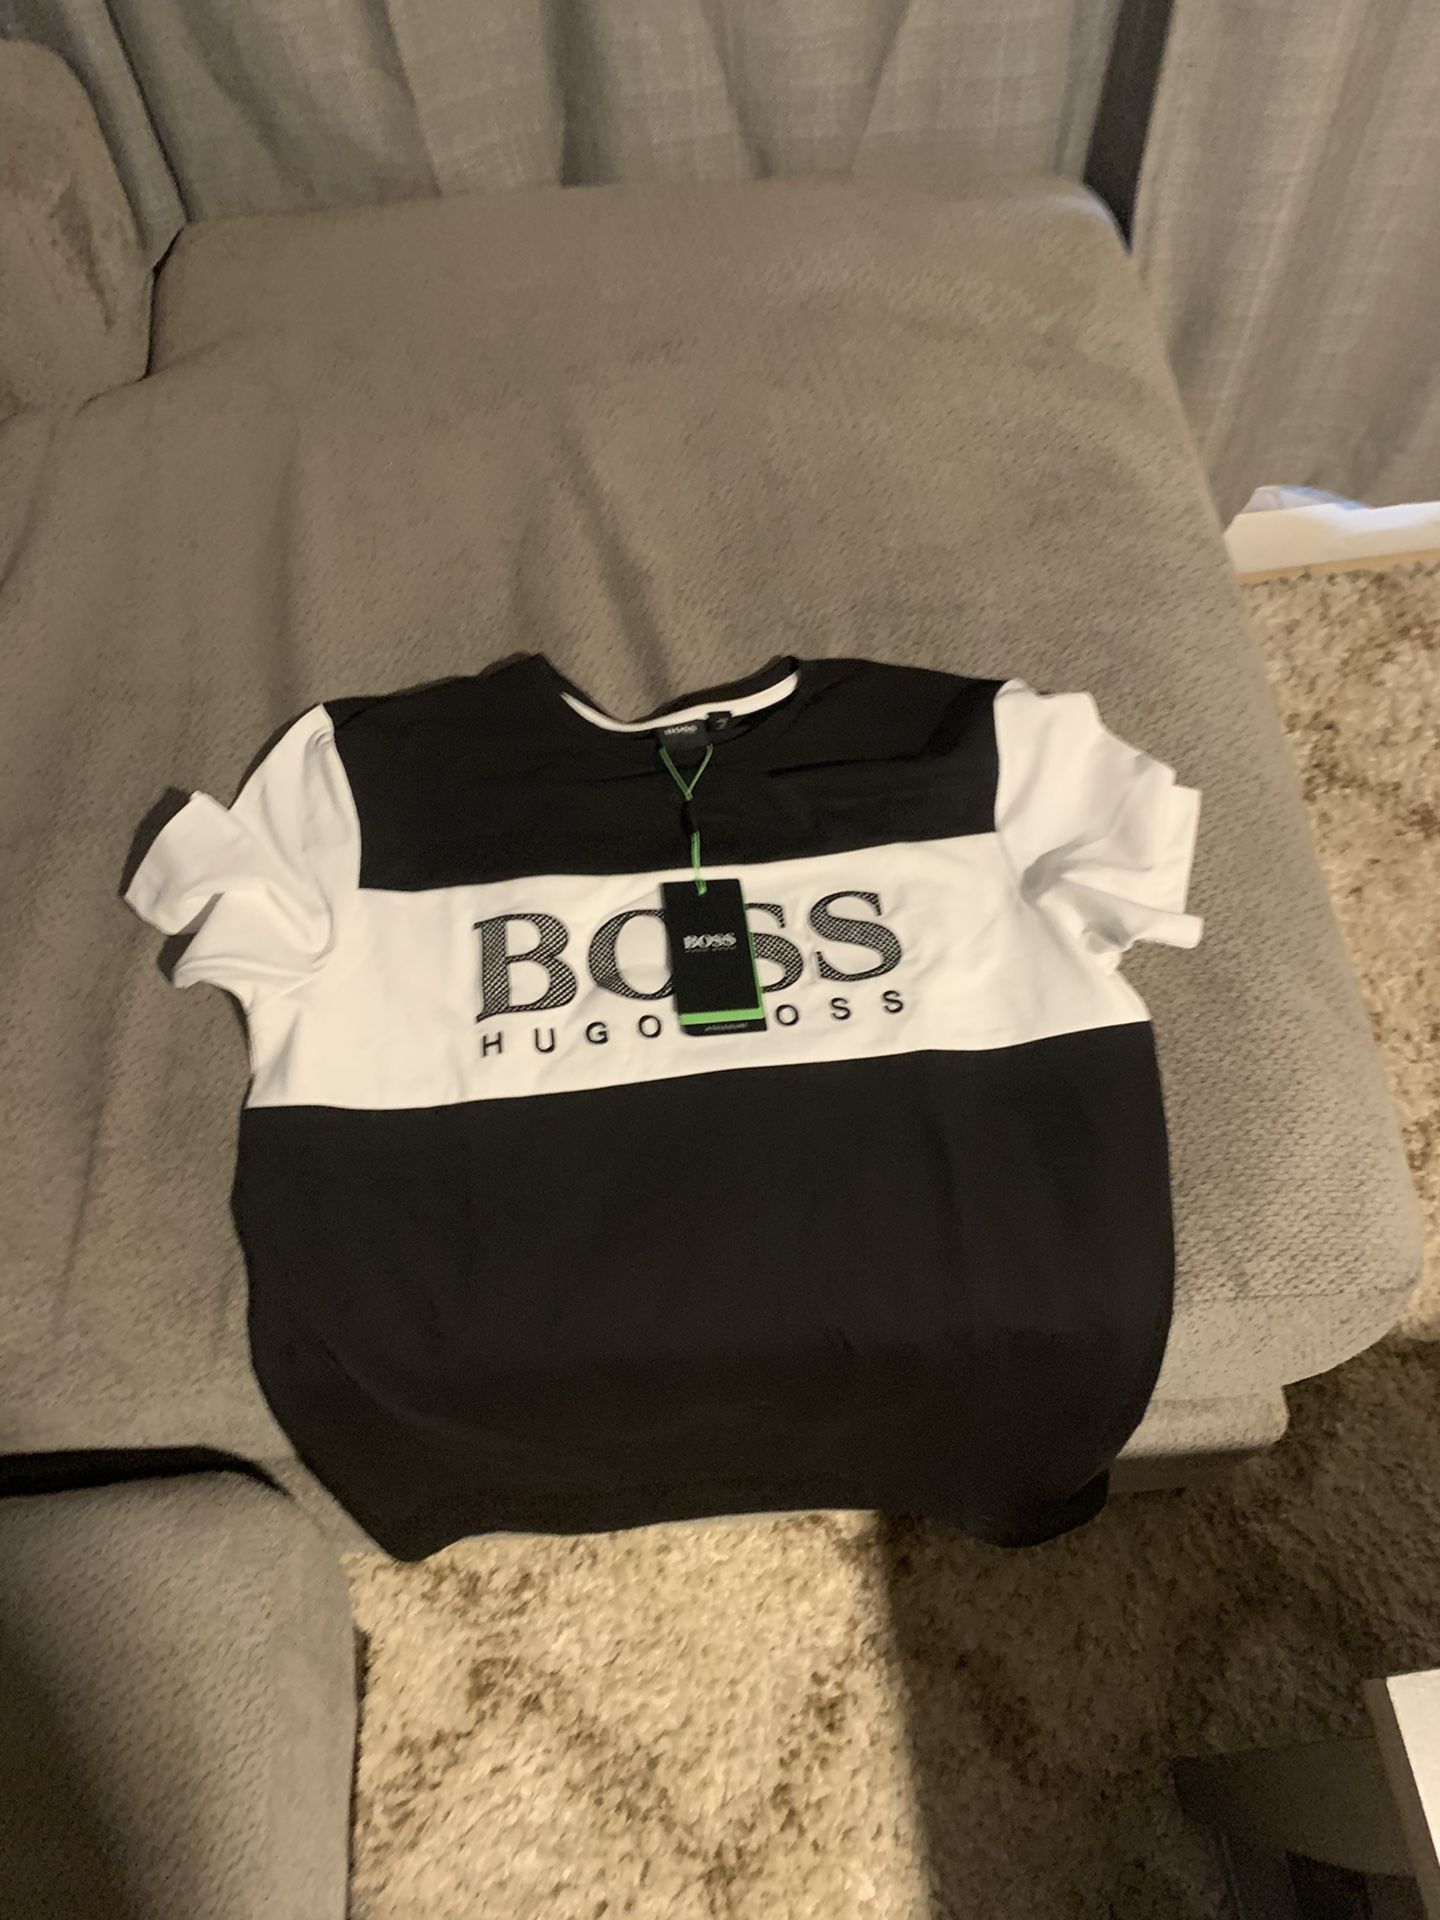 ‘s boss shirt and Burberry shirt yes offer trades